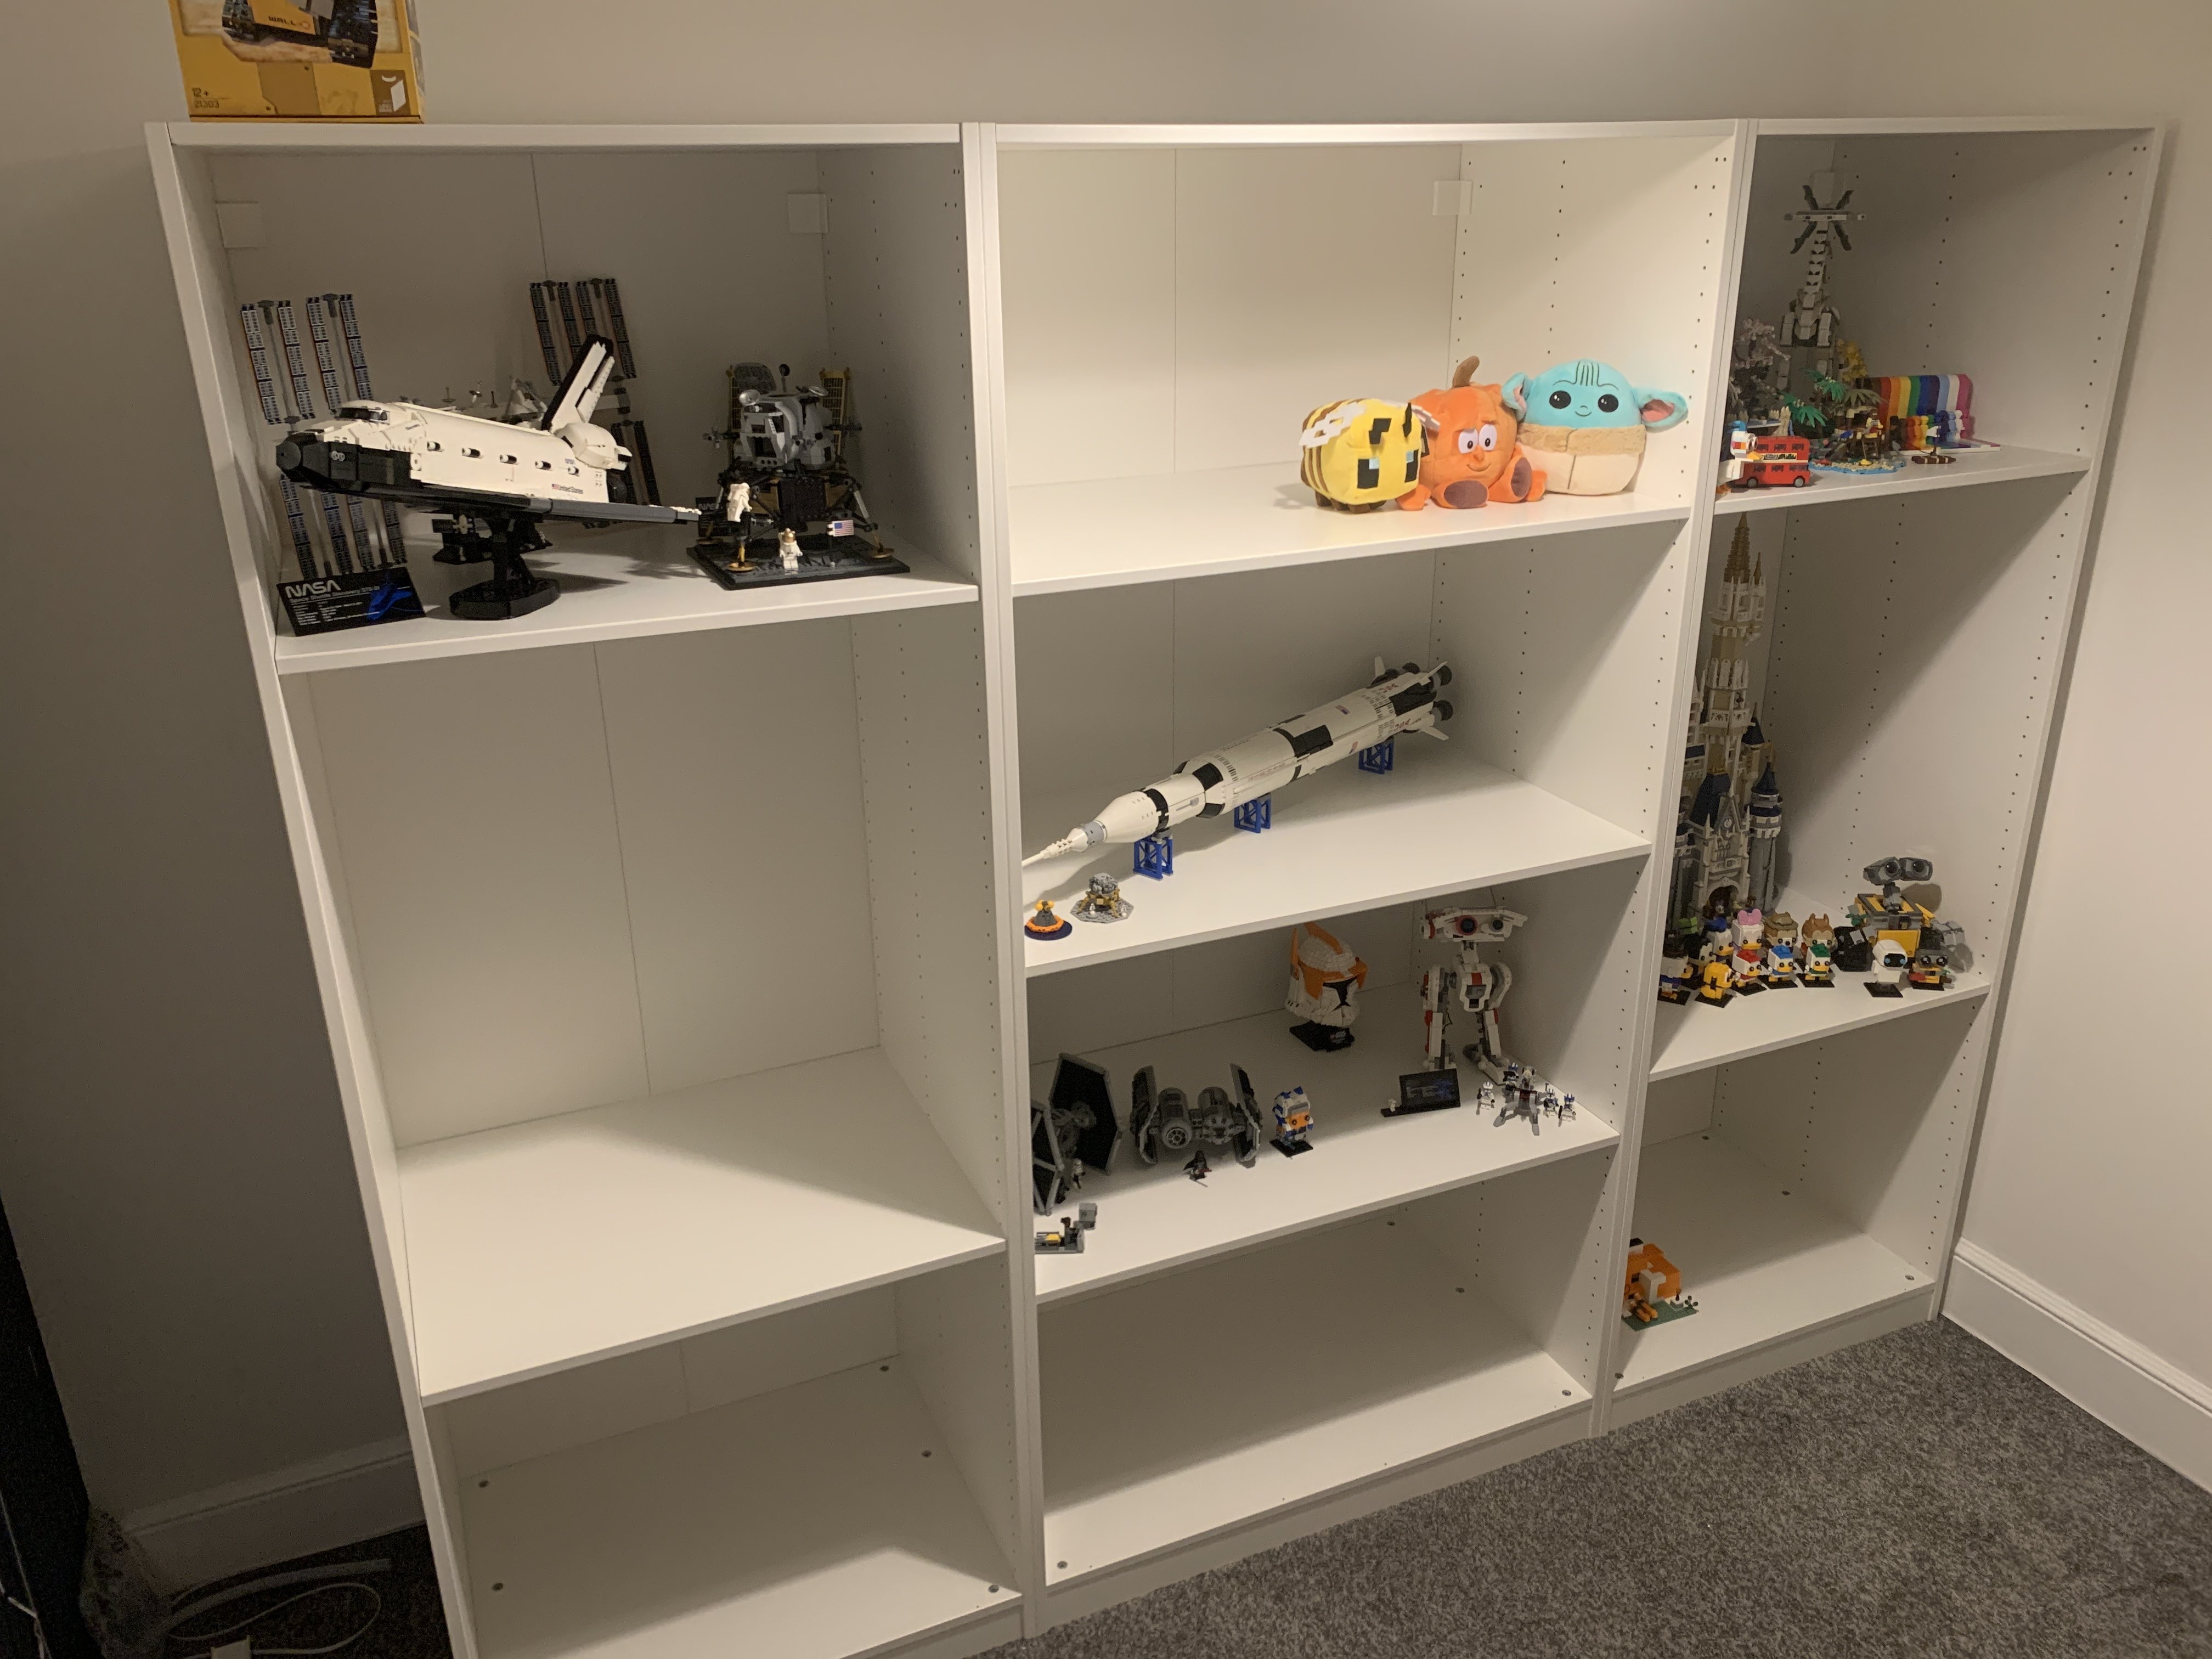 Three white shelving units stood next to each other. On the shelves are various Lego sets and some plushies. Top left is a collection of NASA models, including the ISS, Space Shutter and Lunar Lander. The top centre has three plushies: a Minecraft bee, a pumpkin with eyes, and a Grogu. Below that is a model of the Saturn V rocket. Below that is a collection of Star Wars models, including a TIE fighter and bomber. BD-1, a Clone Trooper helmet and a small model of Ahsoka. The top right is a mixed collection of models, including a red London bus, a duck, a Tallneck, and a topical island scene, and the Everyone is Awesome set features a rainbow resign. Below that is a large Disney castle, WALL-E and several assorted Disney characters. Below that is a Minecraft Fox house